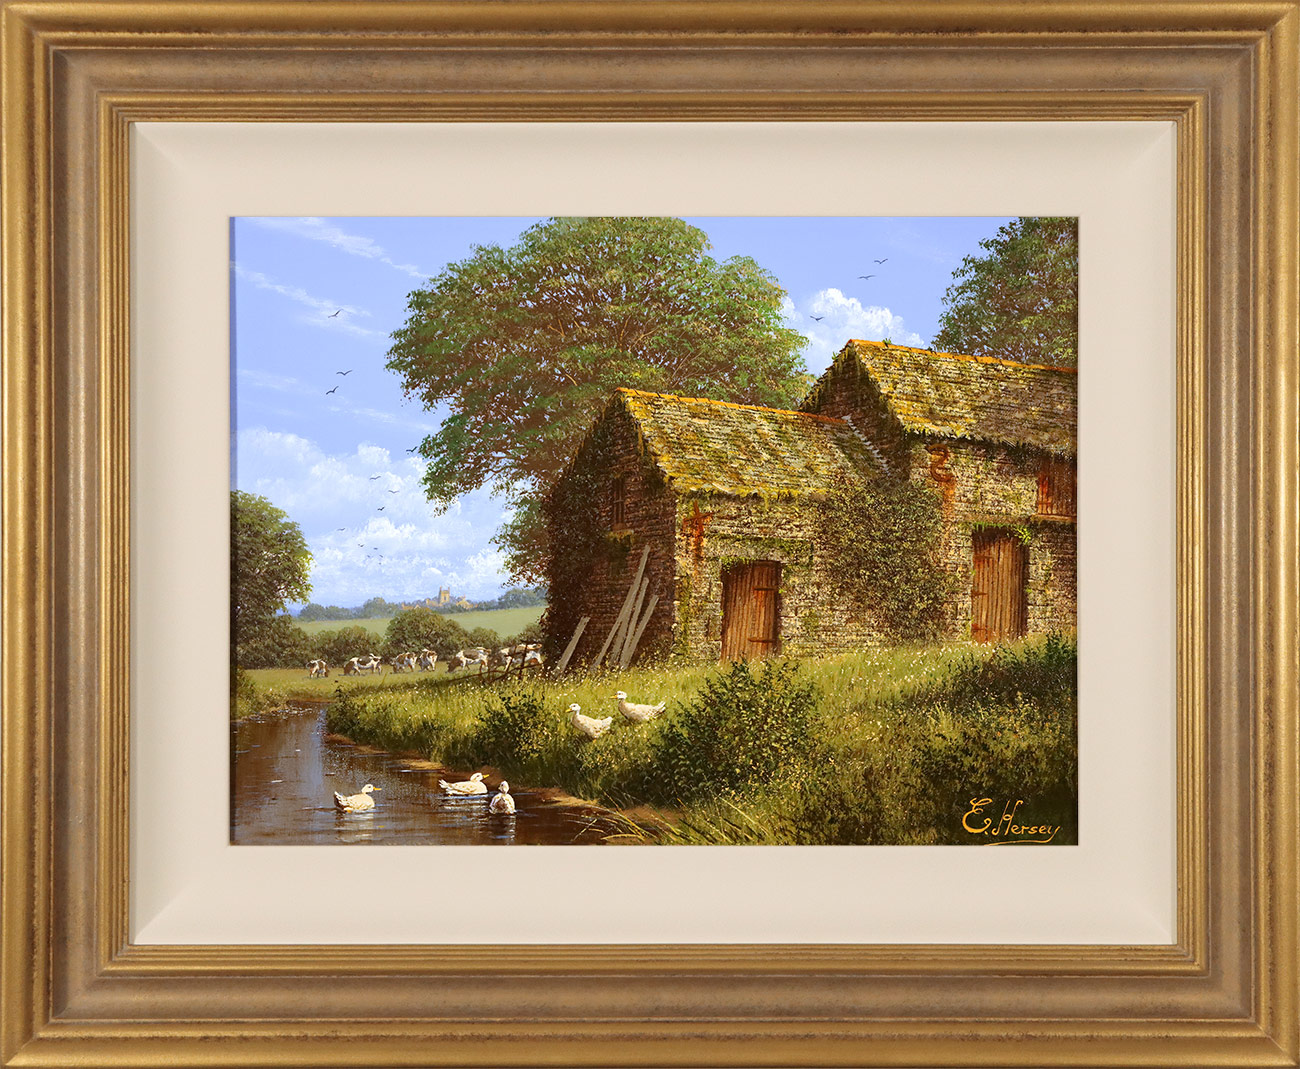 Edward Hersey, Original oil painting on panel, Summer Serenity. Click to enlarge